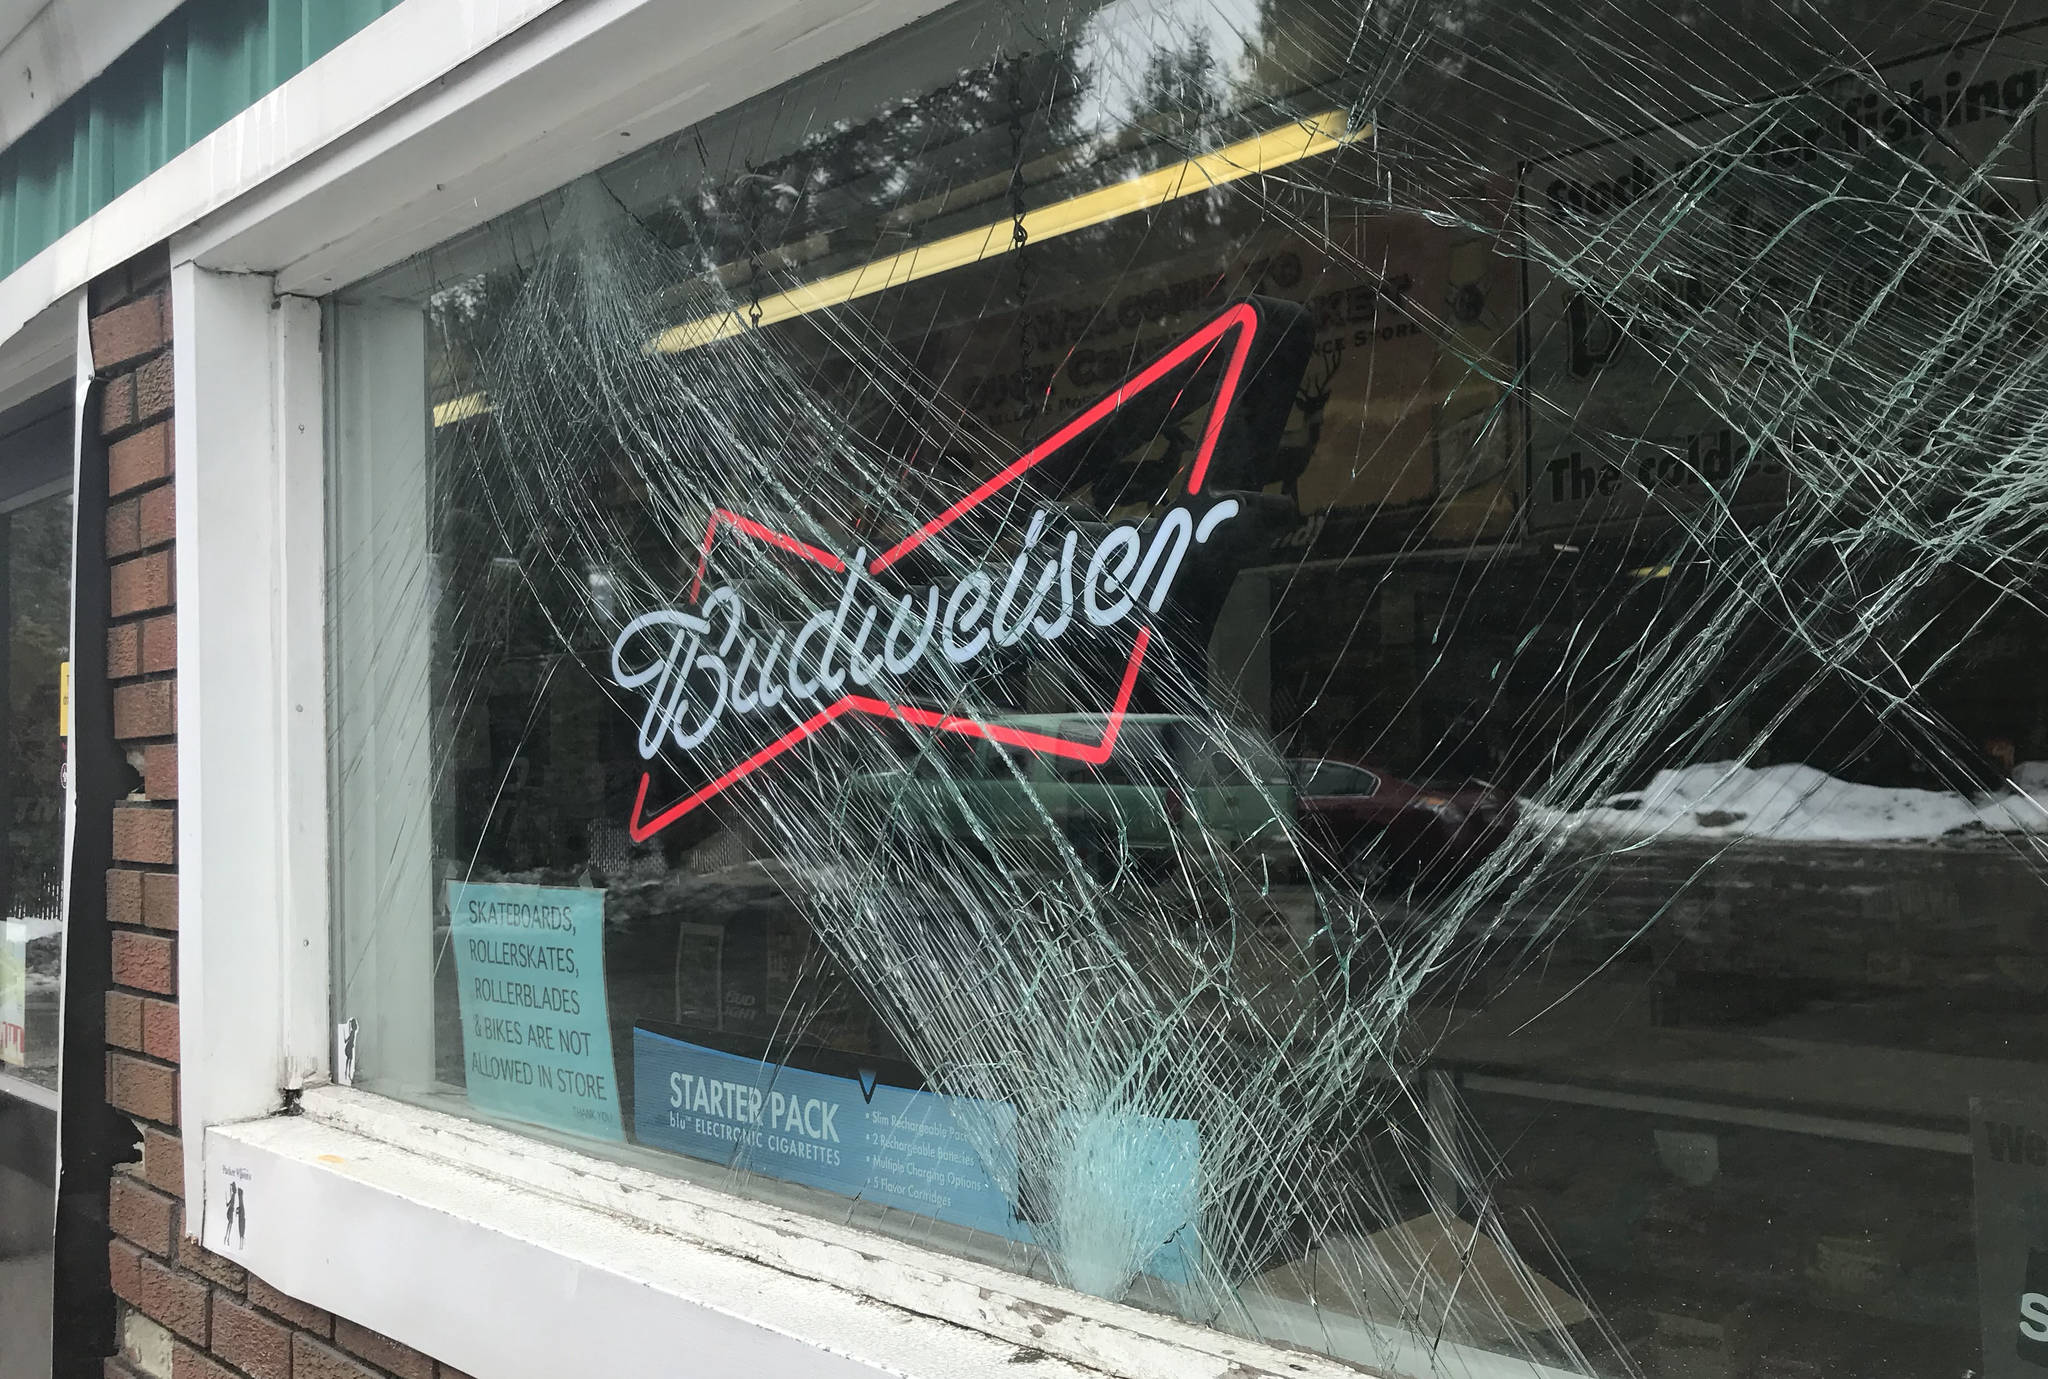 A front window of Duck Creek Market is cracked after a car crashed into the front of the building on Tuesday, March 27, 2018. (Alex McCarthy | Juneau Empire)